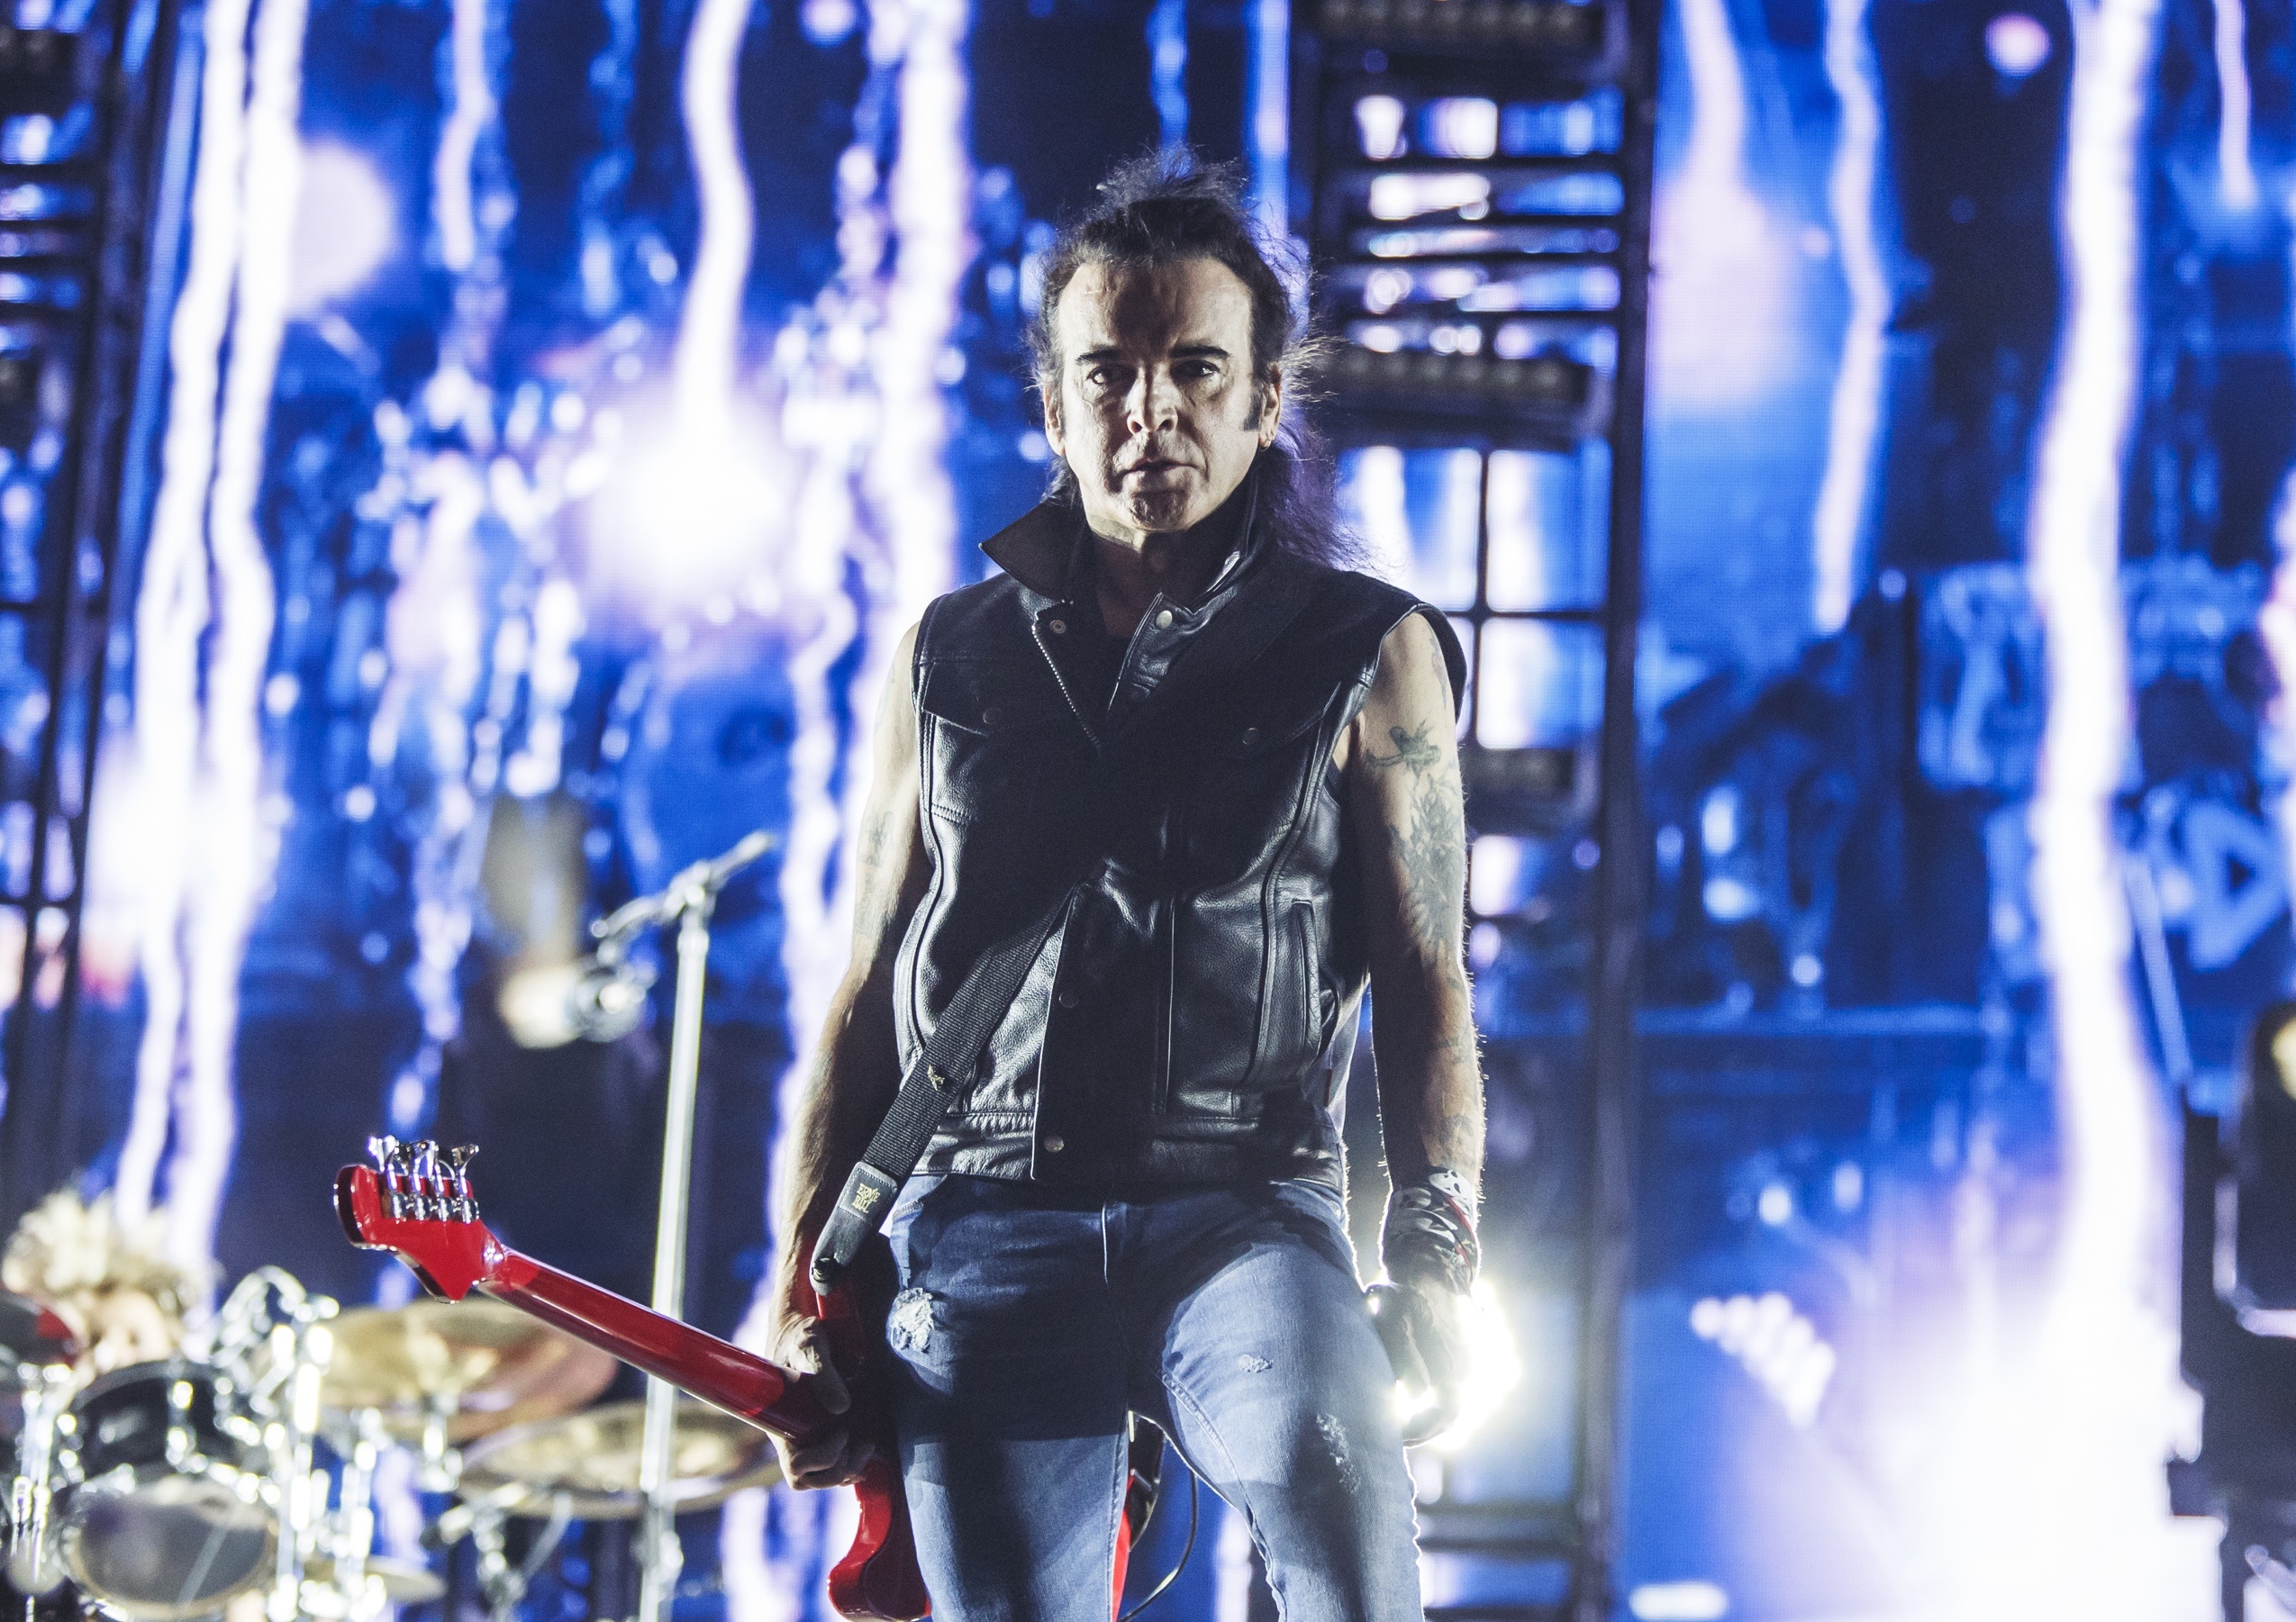 Simon Gallup, Cure bassist, band quits, Son's influence, 2550x1810 HD Desktop